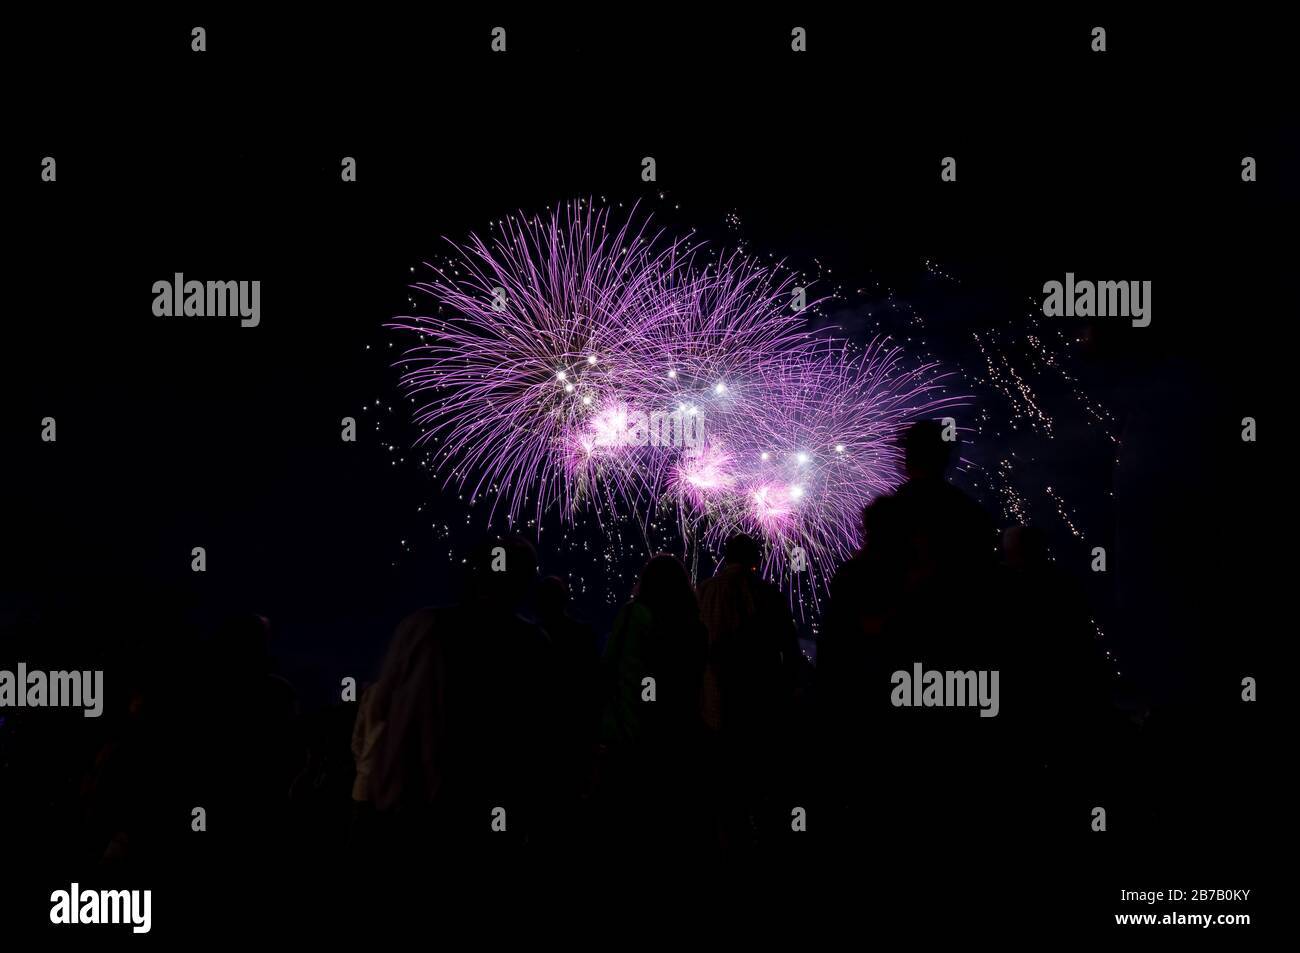 Image of a people in front of a fireworks as silhouettes. Stock Photo